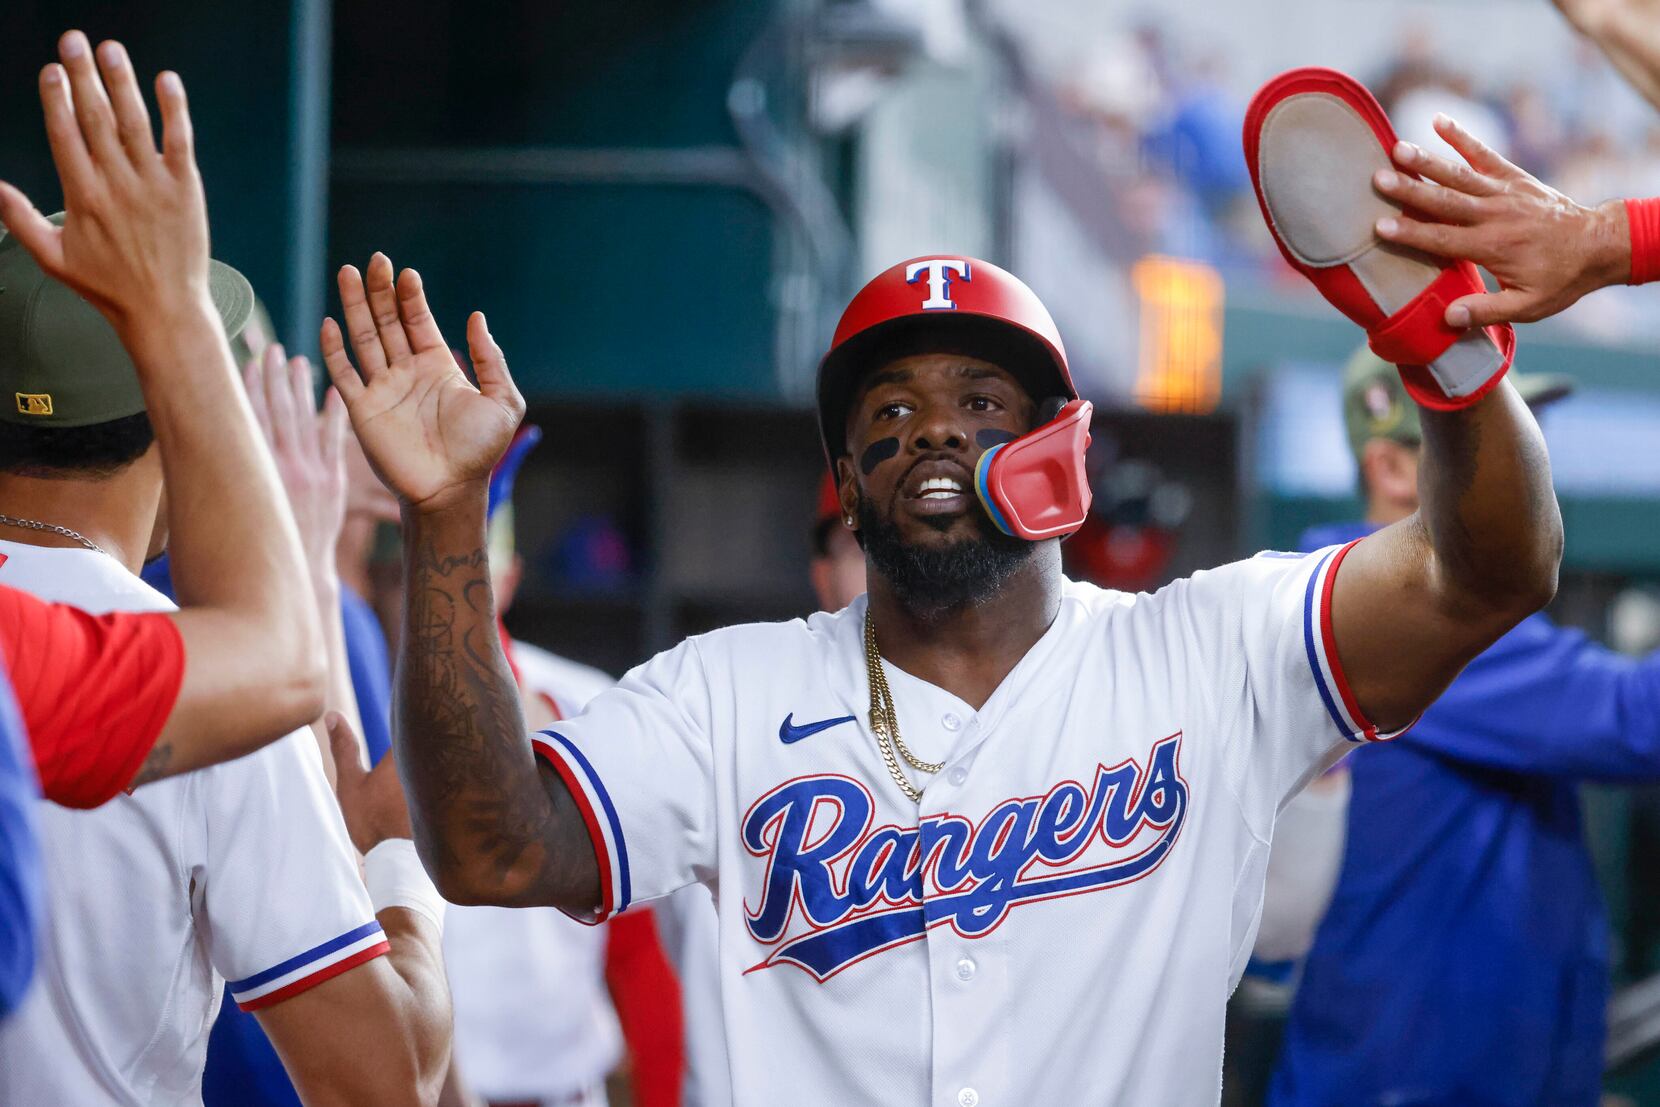 Rangers' All-Star Adolis Garcia puts on a show at Home Run Derby despite  first-round exit